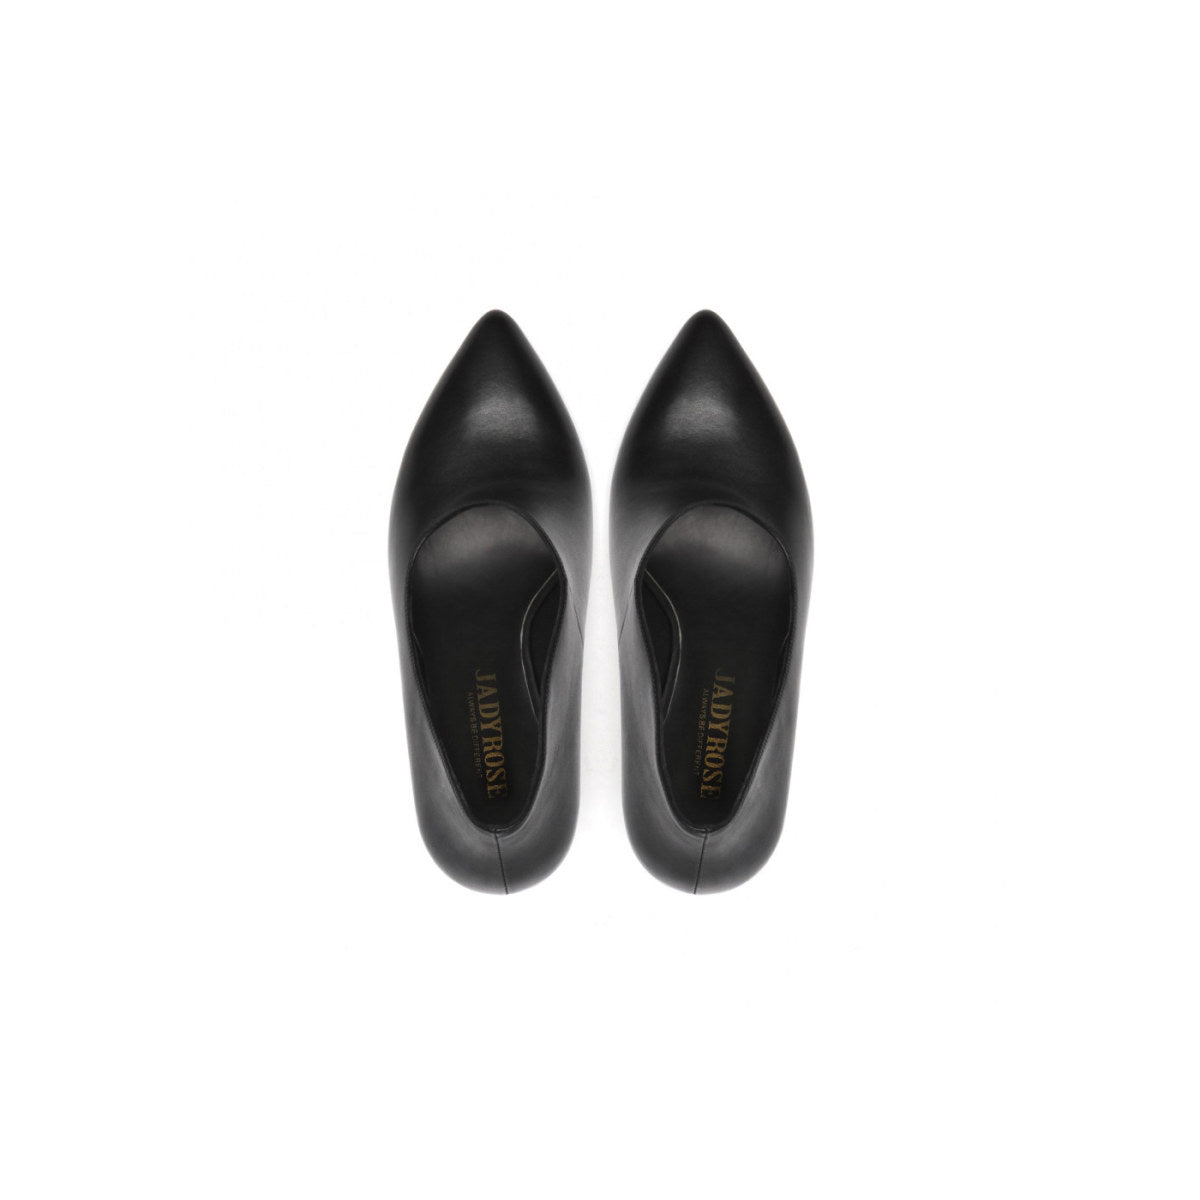 Boaty Chair Heel Leather Black Pumps